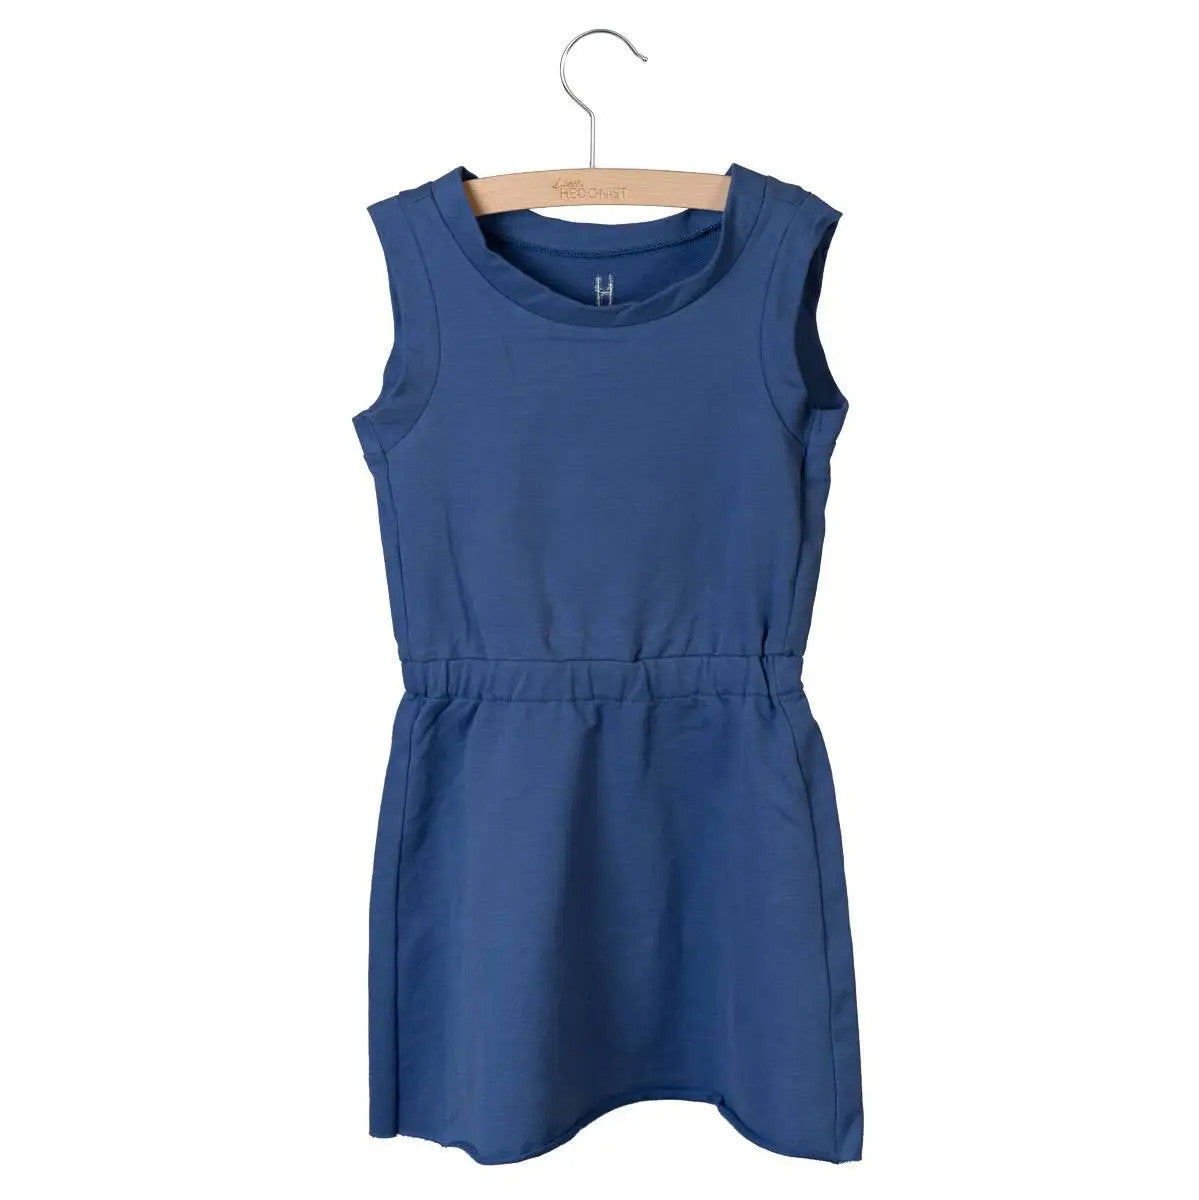 Little Hedonist navy blue sleeveless dress in organic cotton terry cloth. For the little girls who like to look fancy, but stay comfy